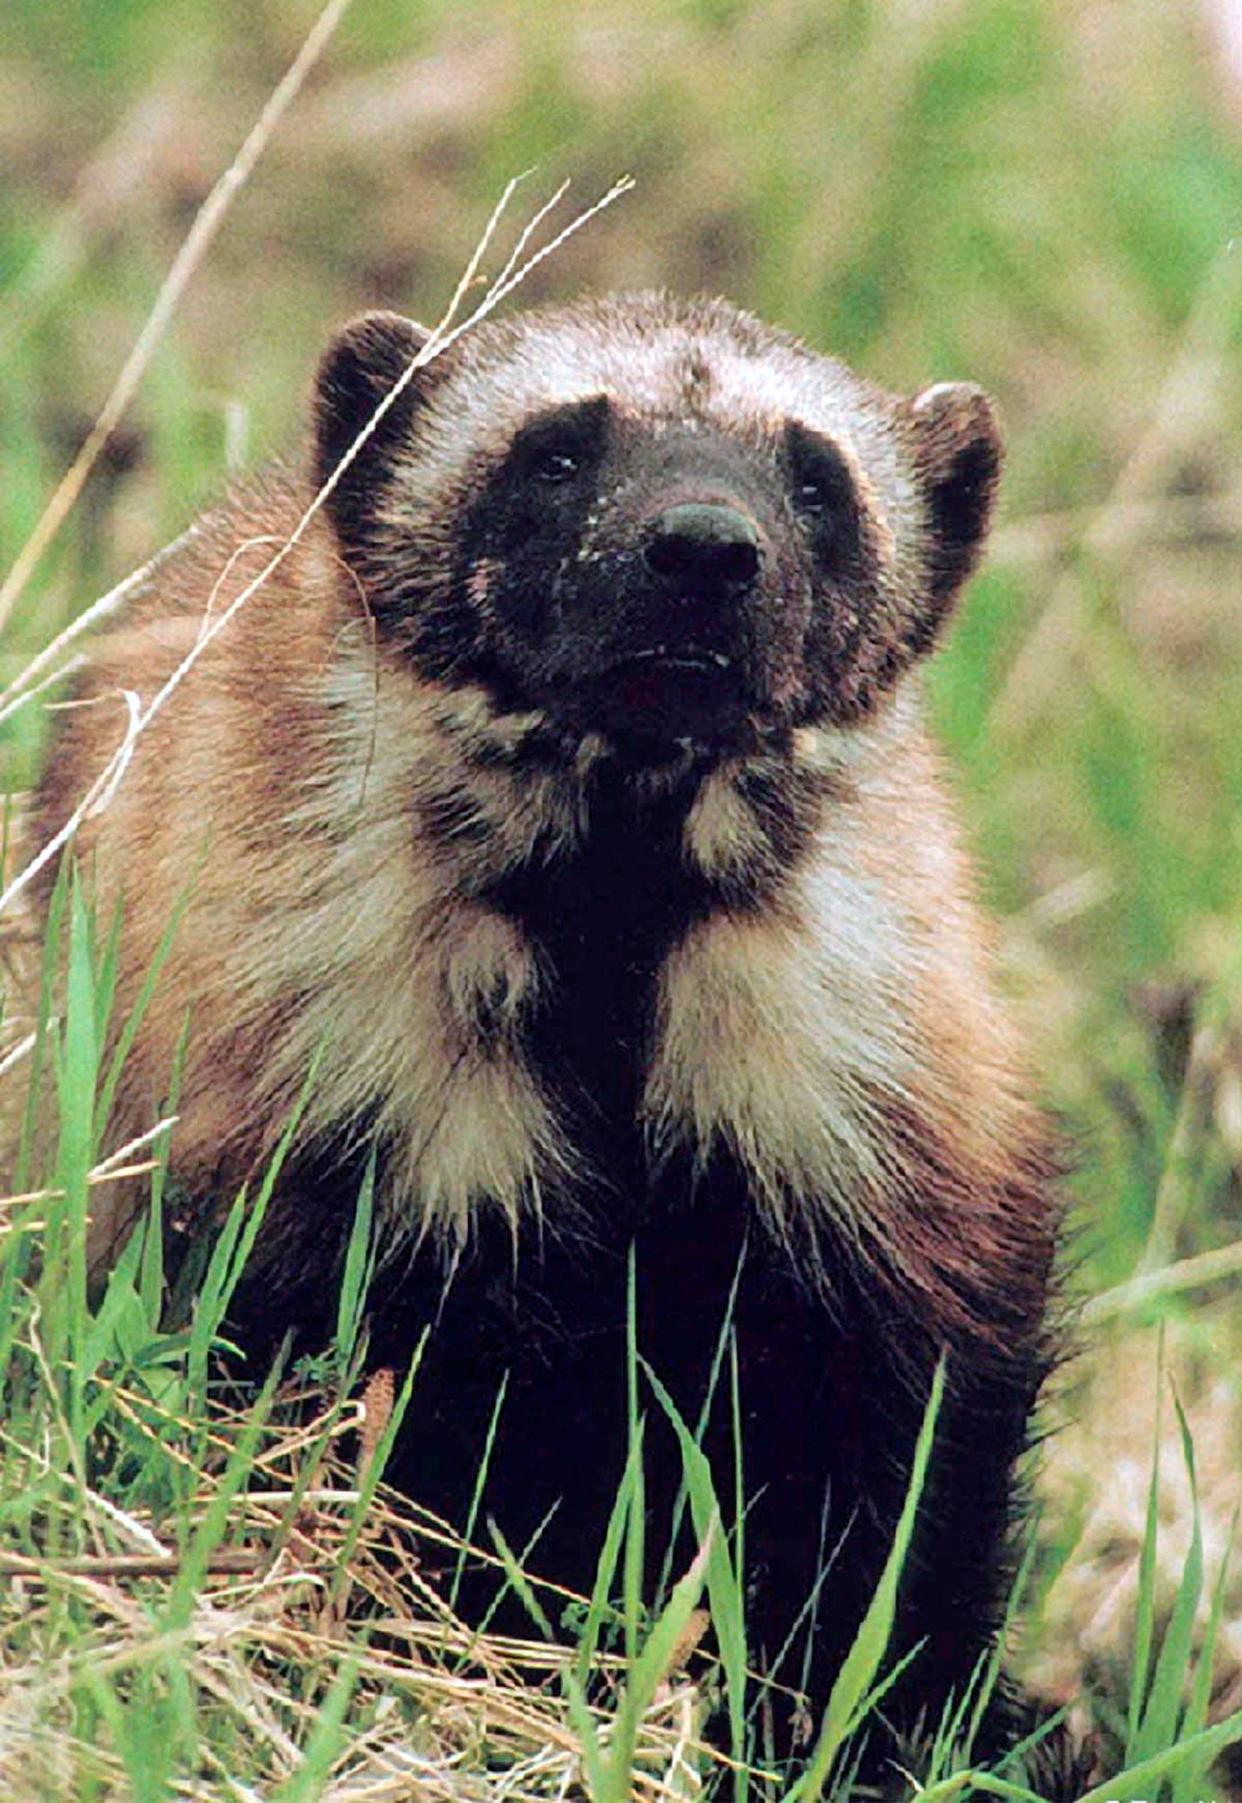 FILE - This undated file photo shows a wolverine in Montana's Glacier National Park. Scientists say climate change could harm populations of the elusive animals that live in alpine areas with deep snow.